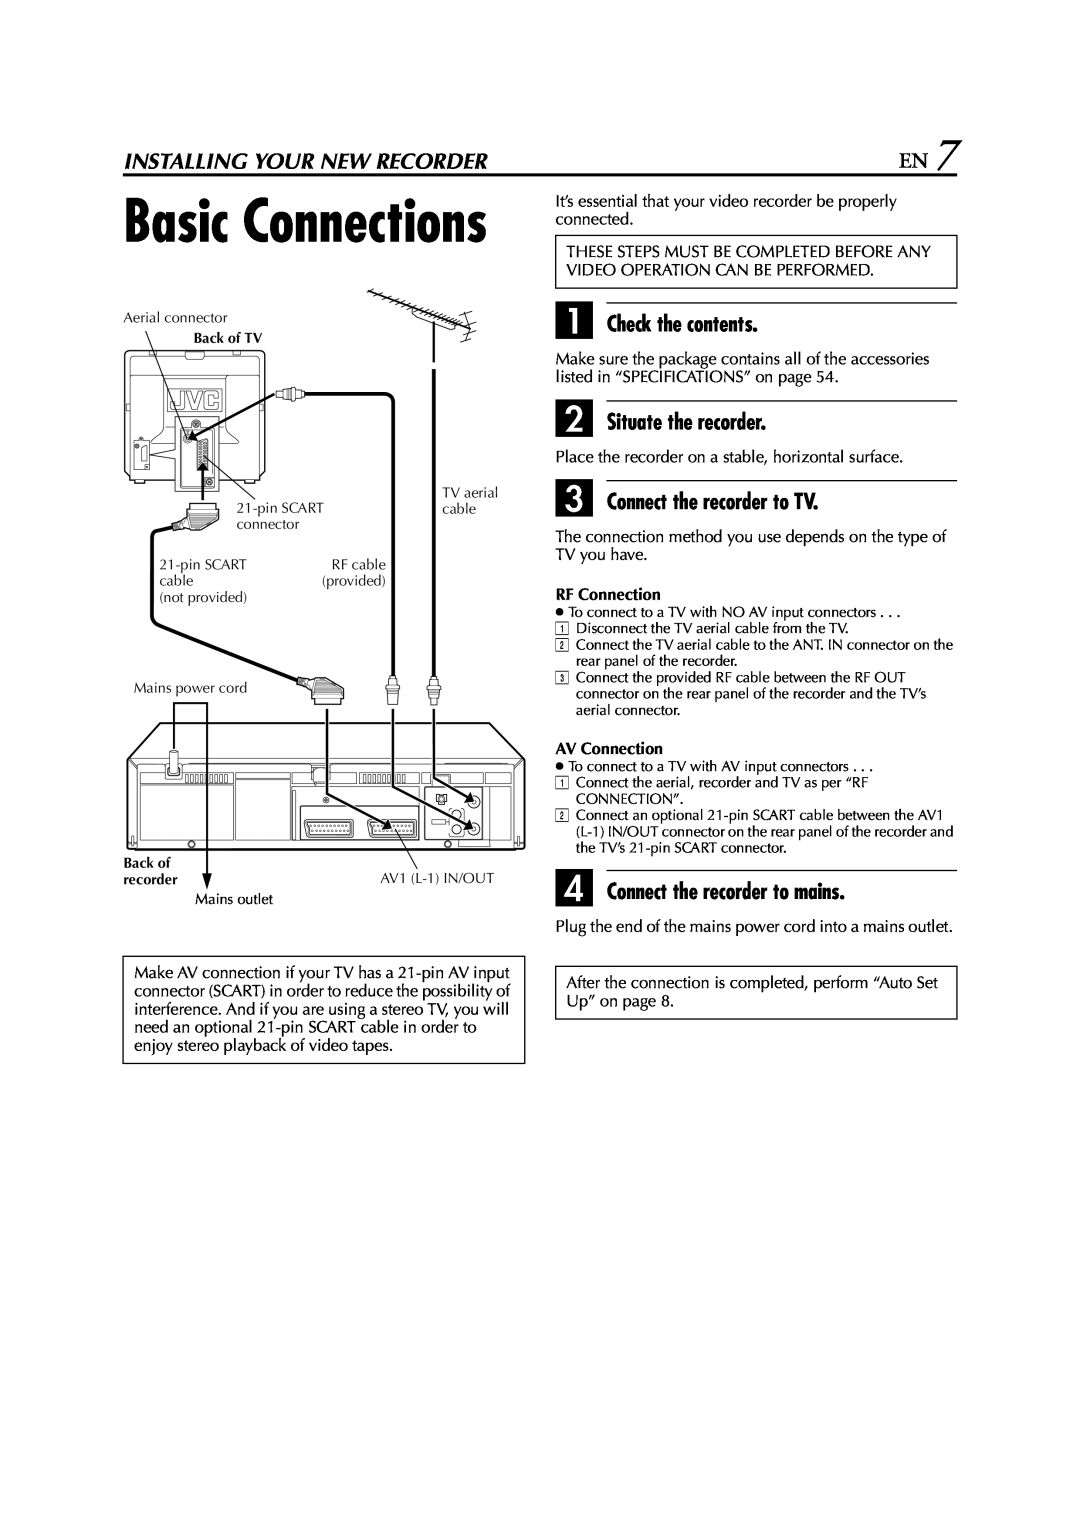 JVC HR-J674EU Basic Connections, Installing Your New Recorder, A Check the contents, B Situate the recorder, RF Connection 